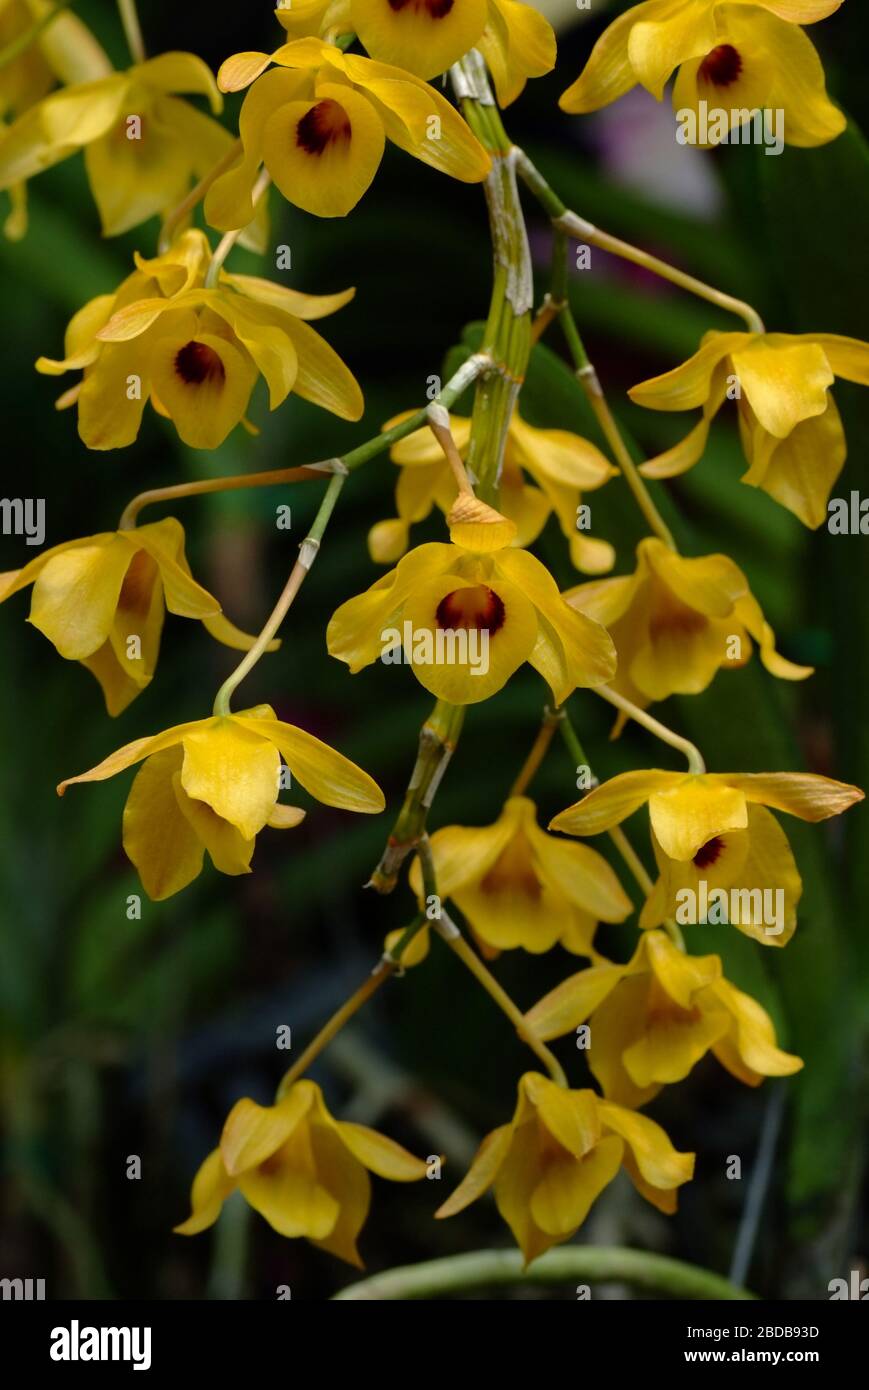 Dendrobium densiflorum,  is a species of epiphytic or lithophytic orchid that is native to Asia. It has club-shaped stems, three or four leathery leav Stock Photo